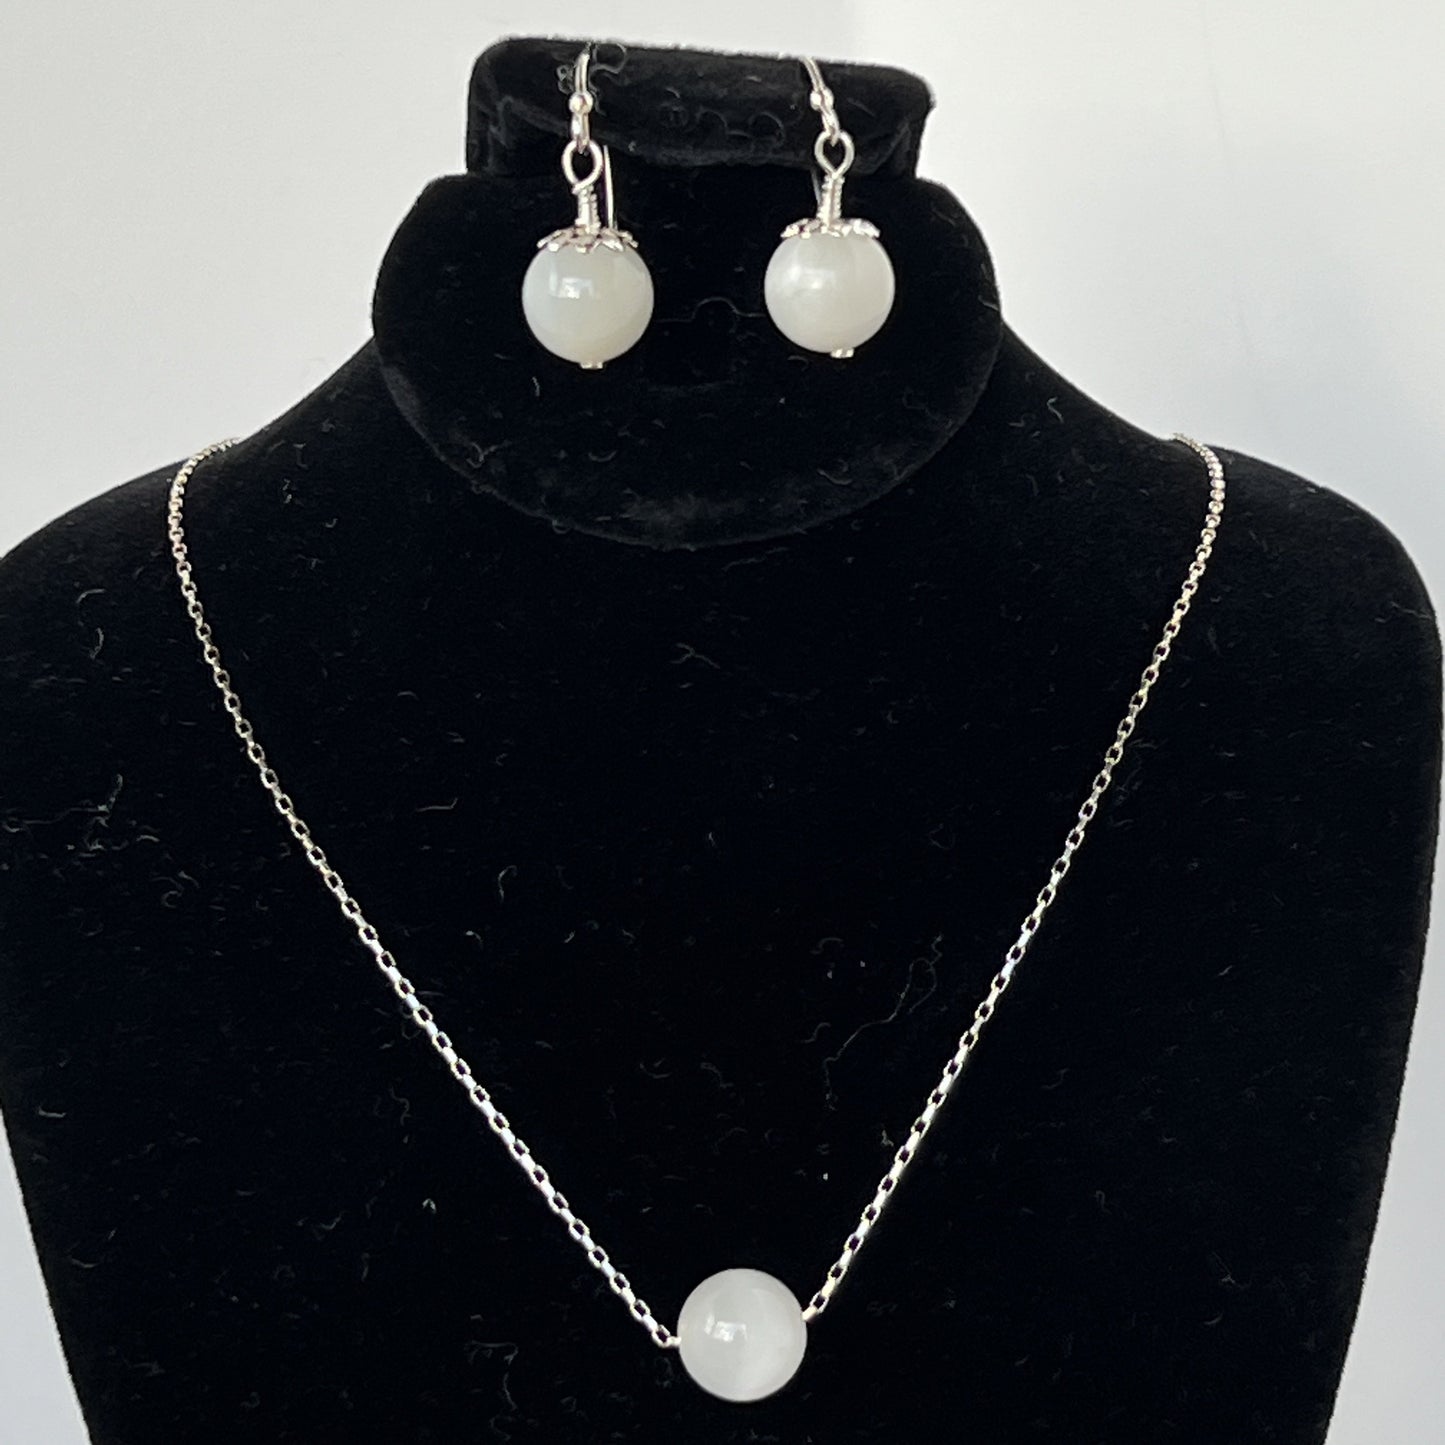 10mm moonstone beads earrings & pendant with magnet clasp